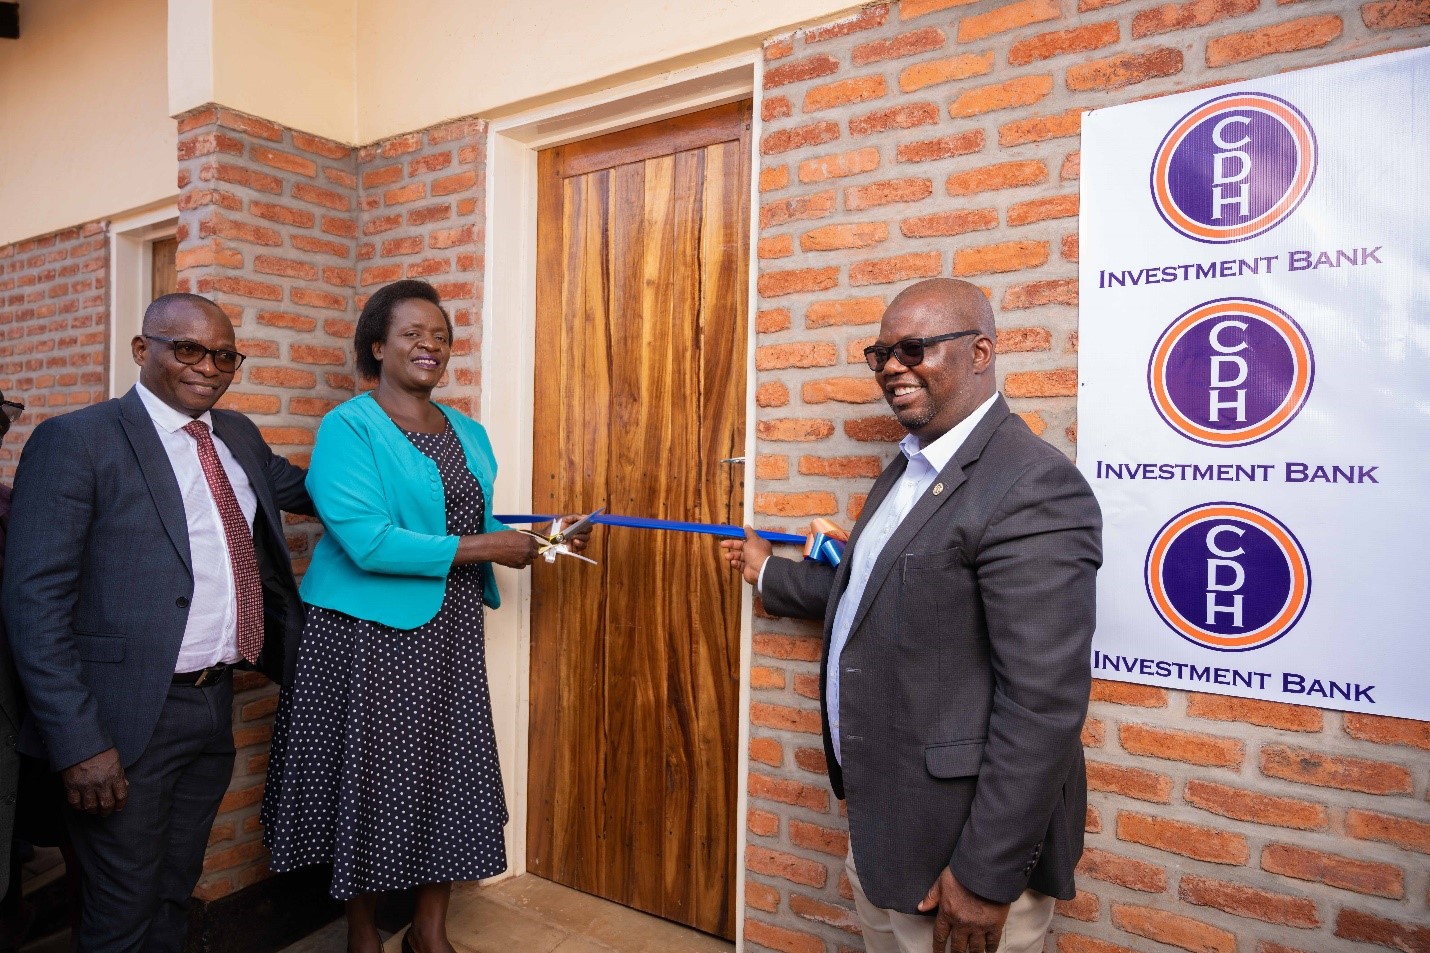 Mr Benison Jambo, CDH Investment Bank Chief Business Development Officer, the Guest of Honor Mrs Judith Chiwoko, The Primary Education Advisor and Mr Innocent Mofolo, PEA, UNC Project Malawi, Country Director cutting ribbon before entering the school block. 